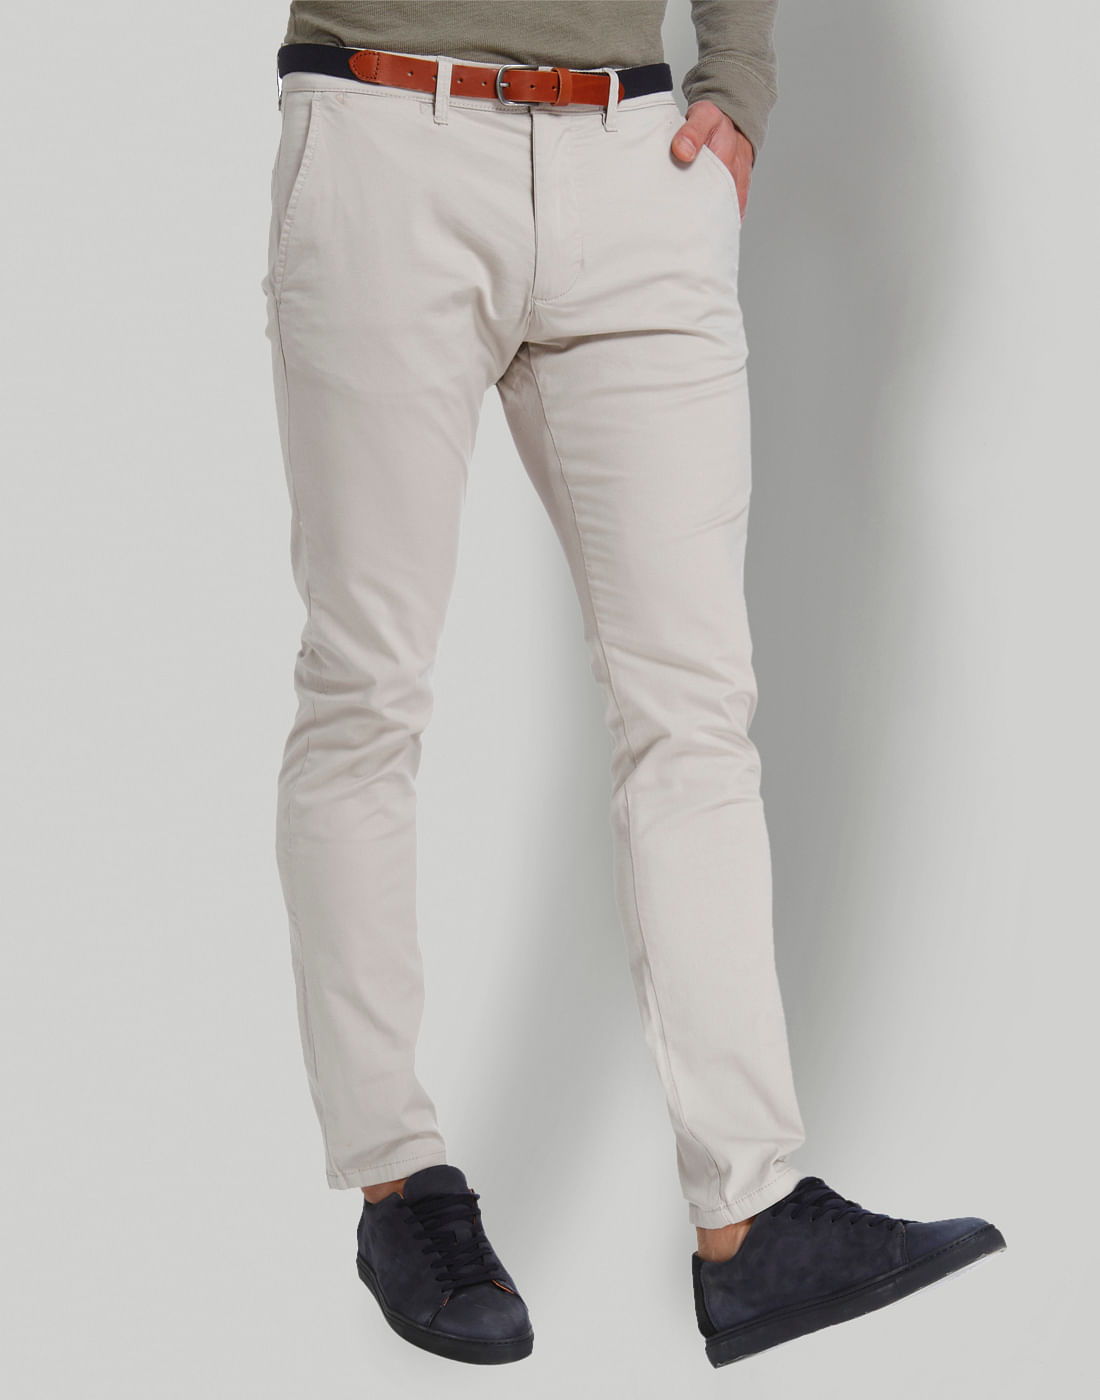 shoes to wear with grey chinos